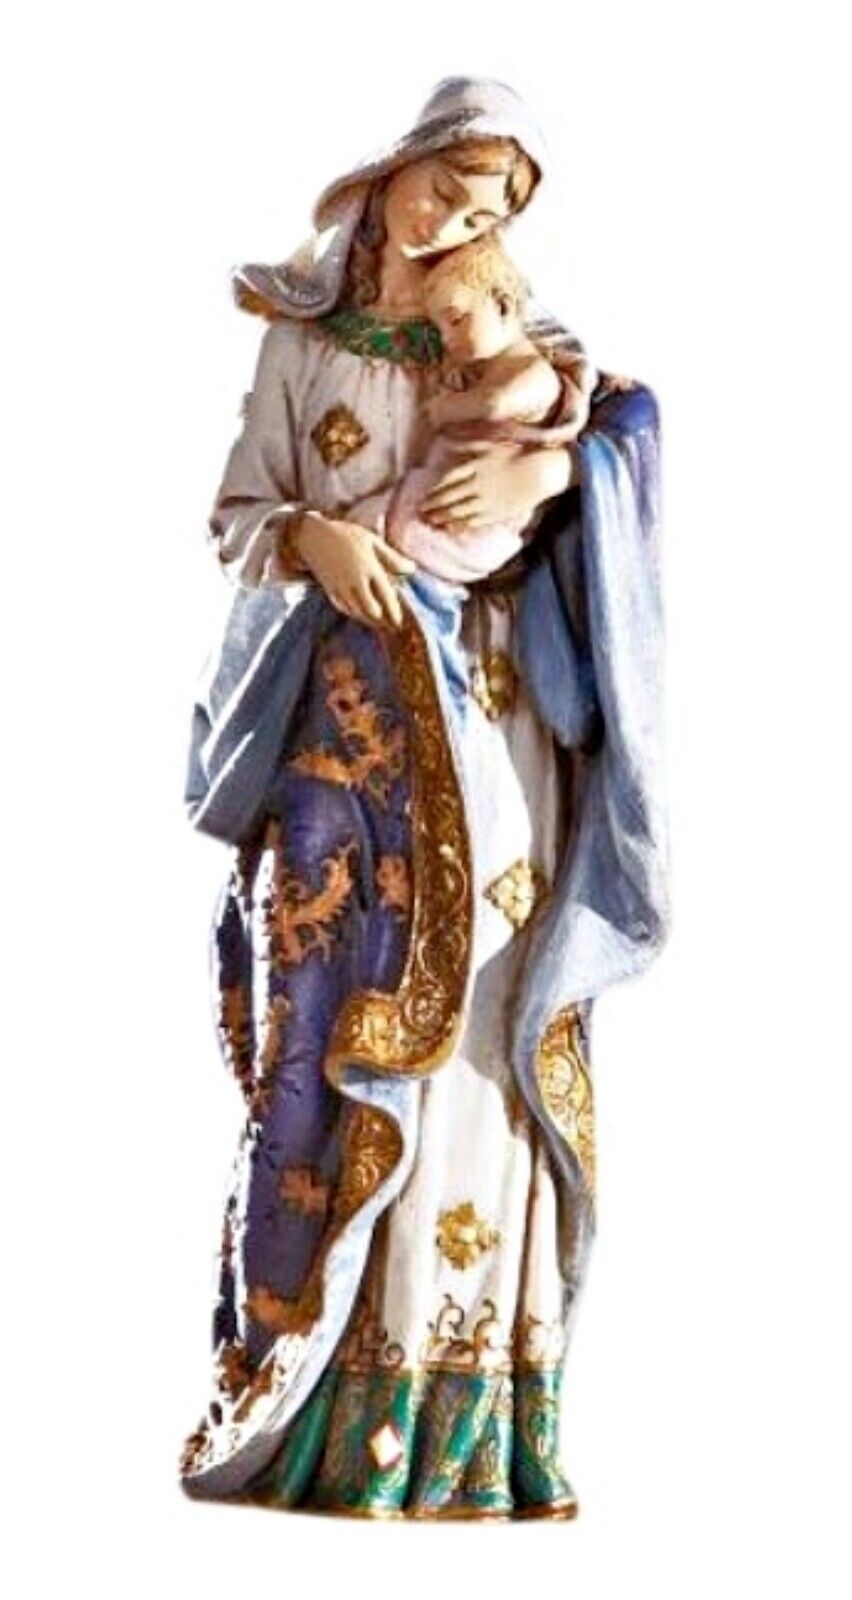 Adoring Madonna and Child Standing Resin Statue for Home D?cor, 7 1/8 In